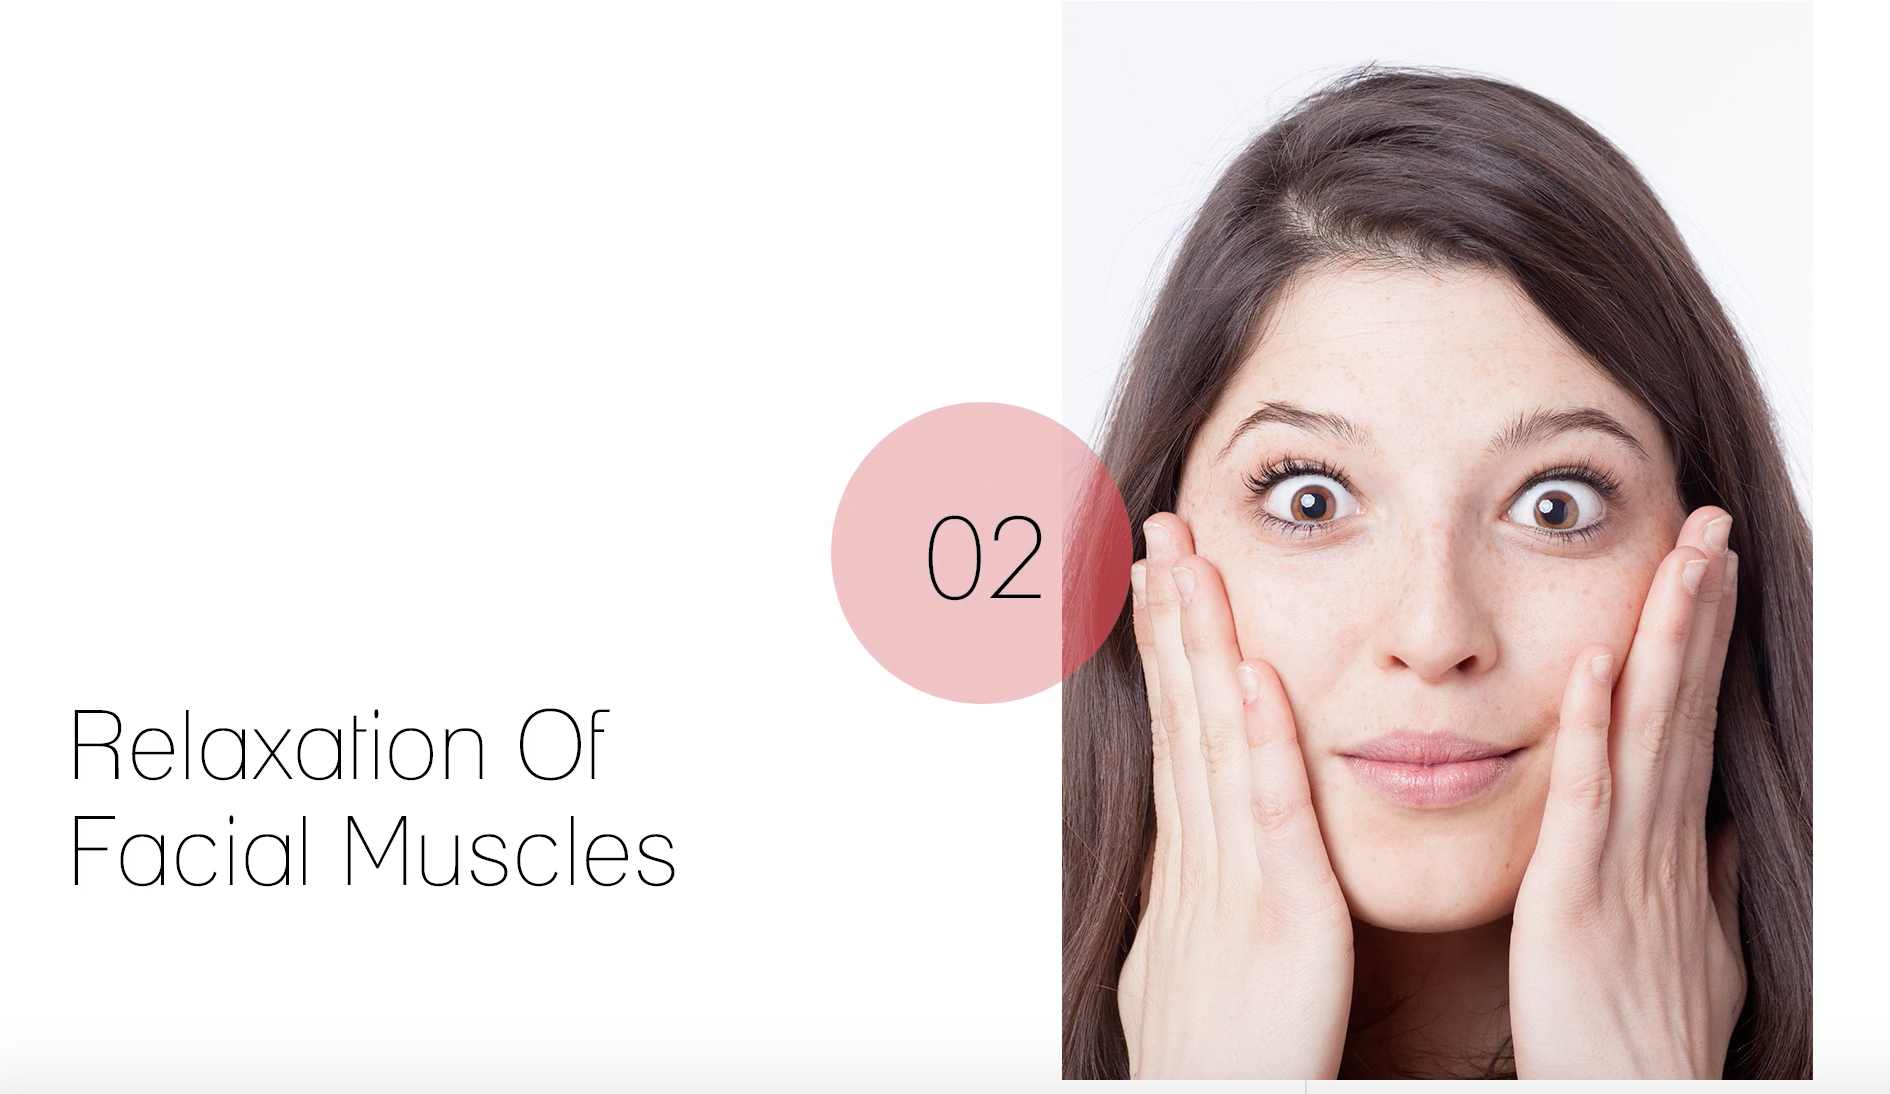 Relaxation Of Facial Muscles – Shiny beats